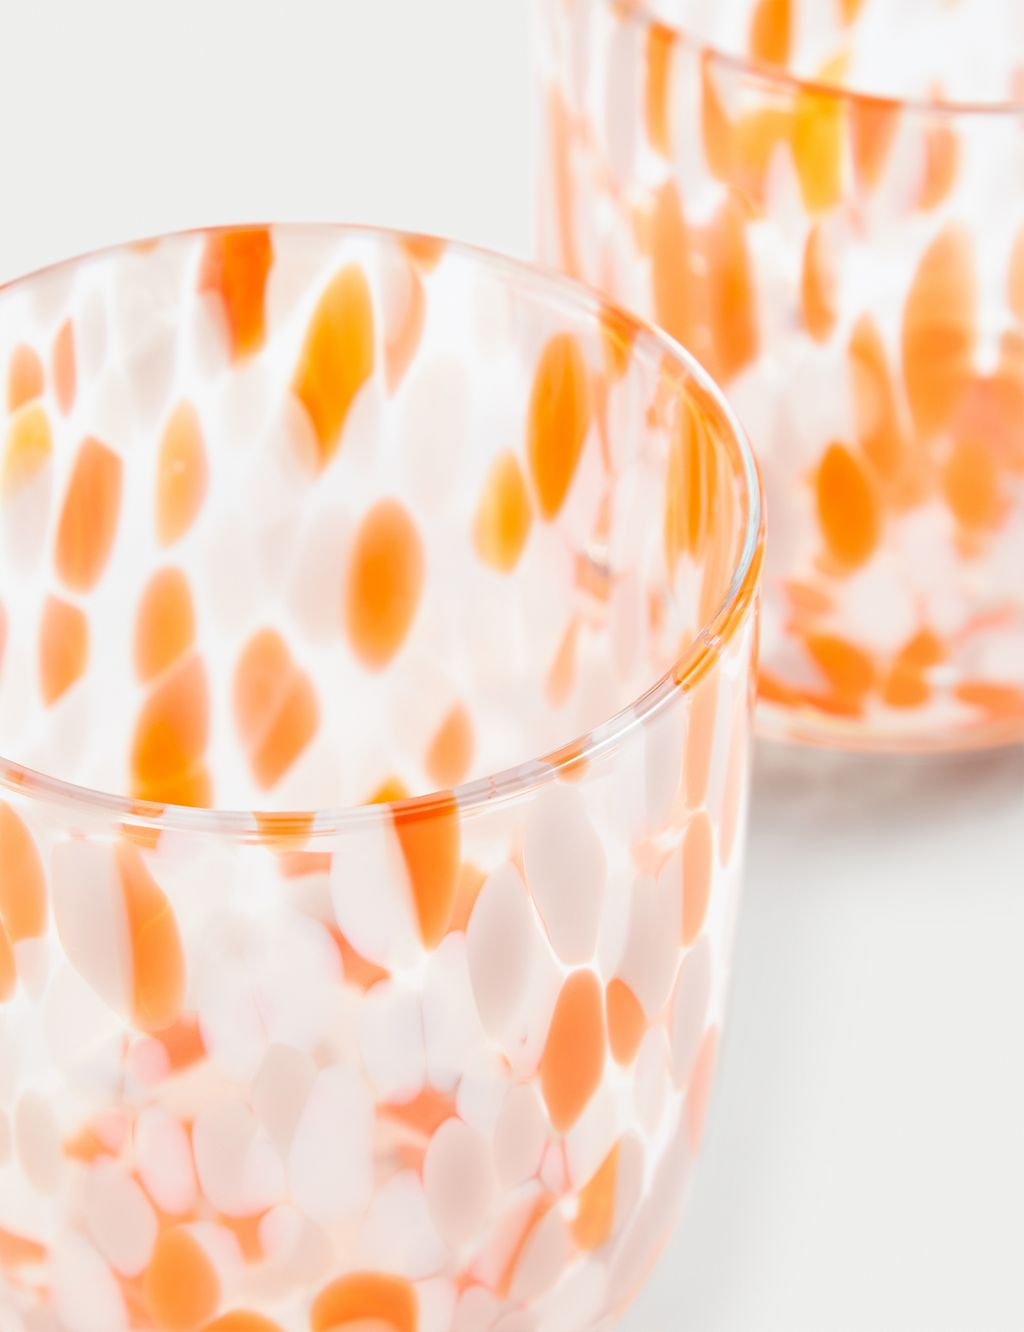 Set of 2 Speckled Tumblers 1 of 5